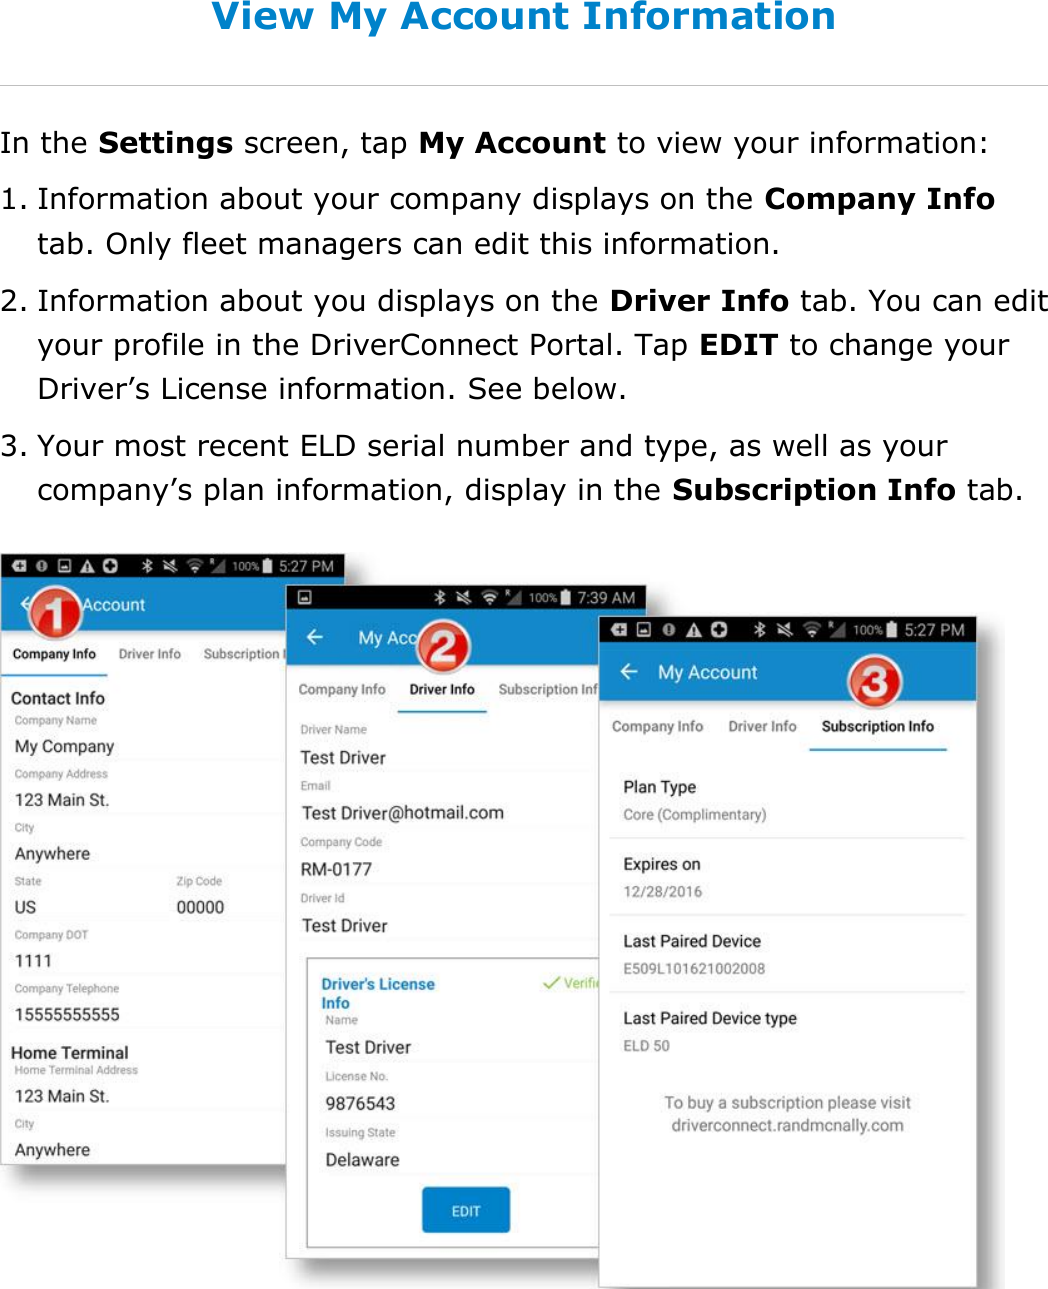 Change My Settings DriverConnect User Guide  87 © 2016-2017, Rand McNally, Inc. View My Account Information In the Settings screen, tap My Account to view your information: 1. Information about your company displays on the Company Info tab. Only fleet managers can edit this information. 2. Information about you displays on the Driver Info tab. You can edit your profile in the DriverConnect Portal. Tap EDIT to change your Driver’s License information. See below.  3. Your most recent ELD serial number and type, as well as your company’s plan information, display in the Subscription Info tab.    